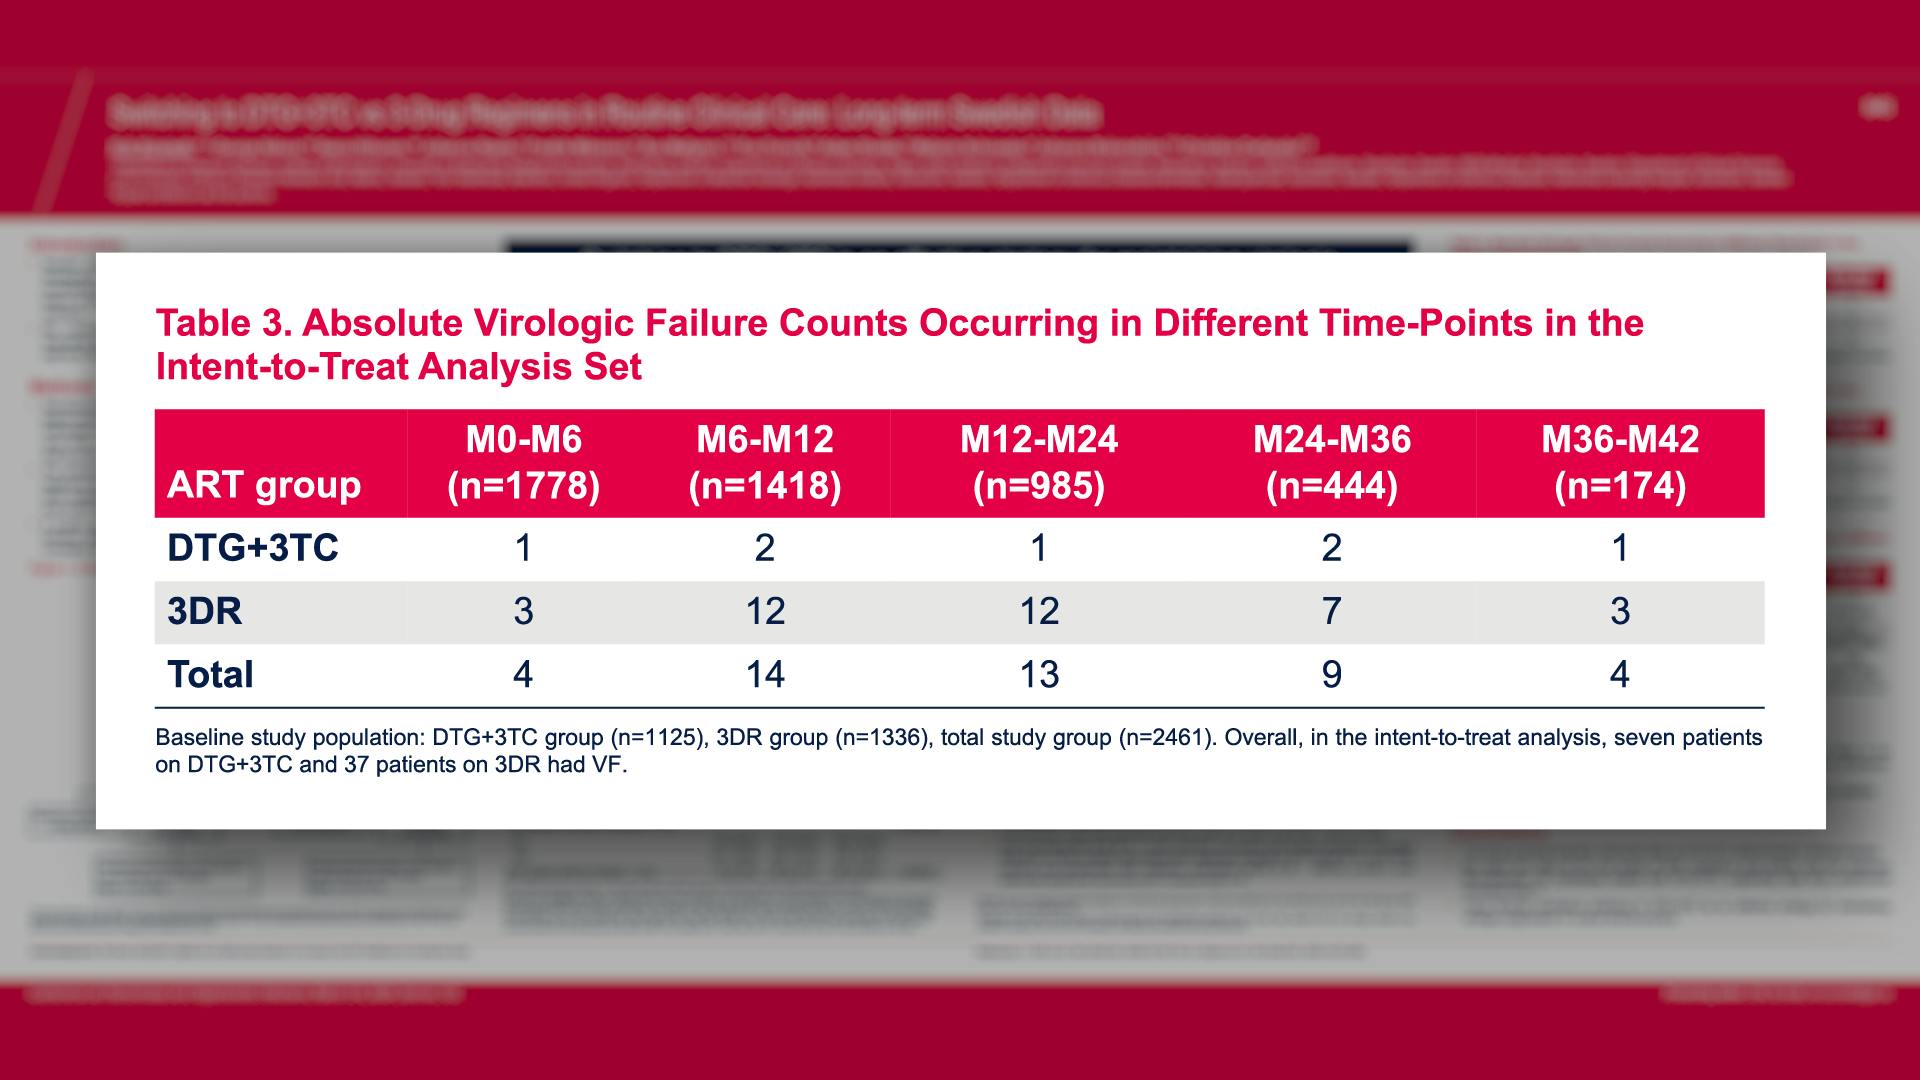 Absolute Virologic Failure Counts Occurring in Different Time-Points in the Intent-to-Treat Analysis Set